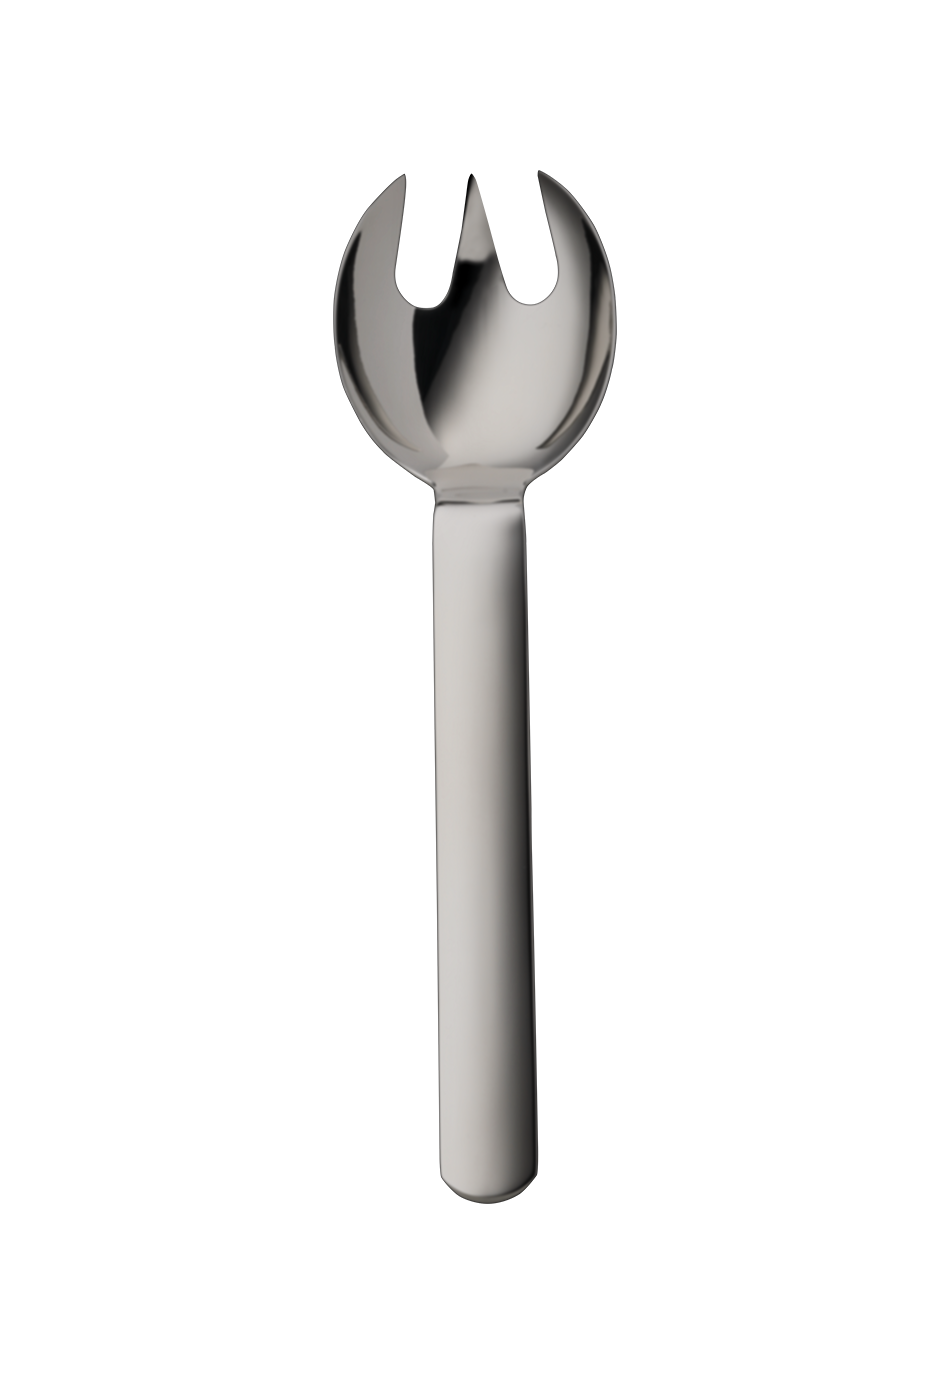 Topos Vegetable Fork (18/8 stainless steel)